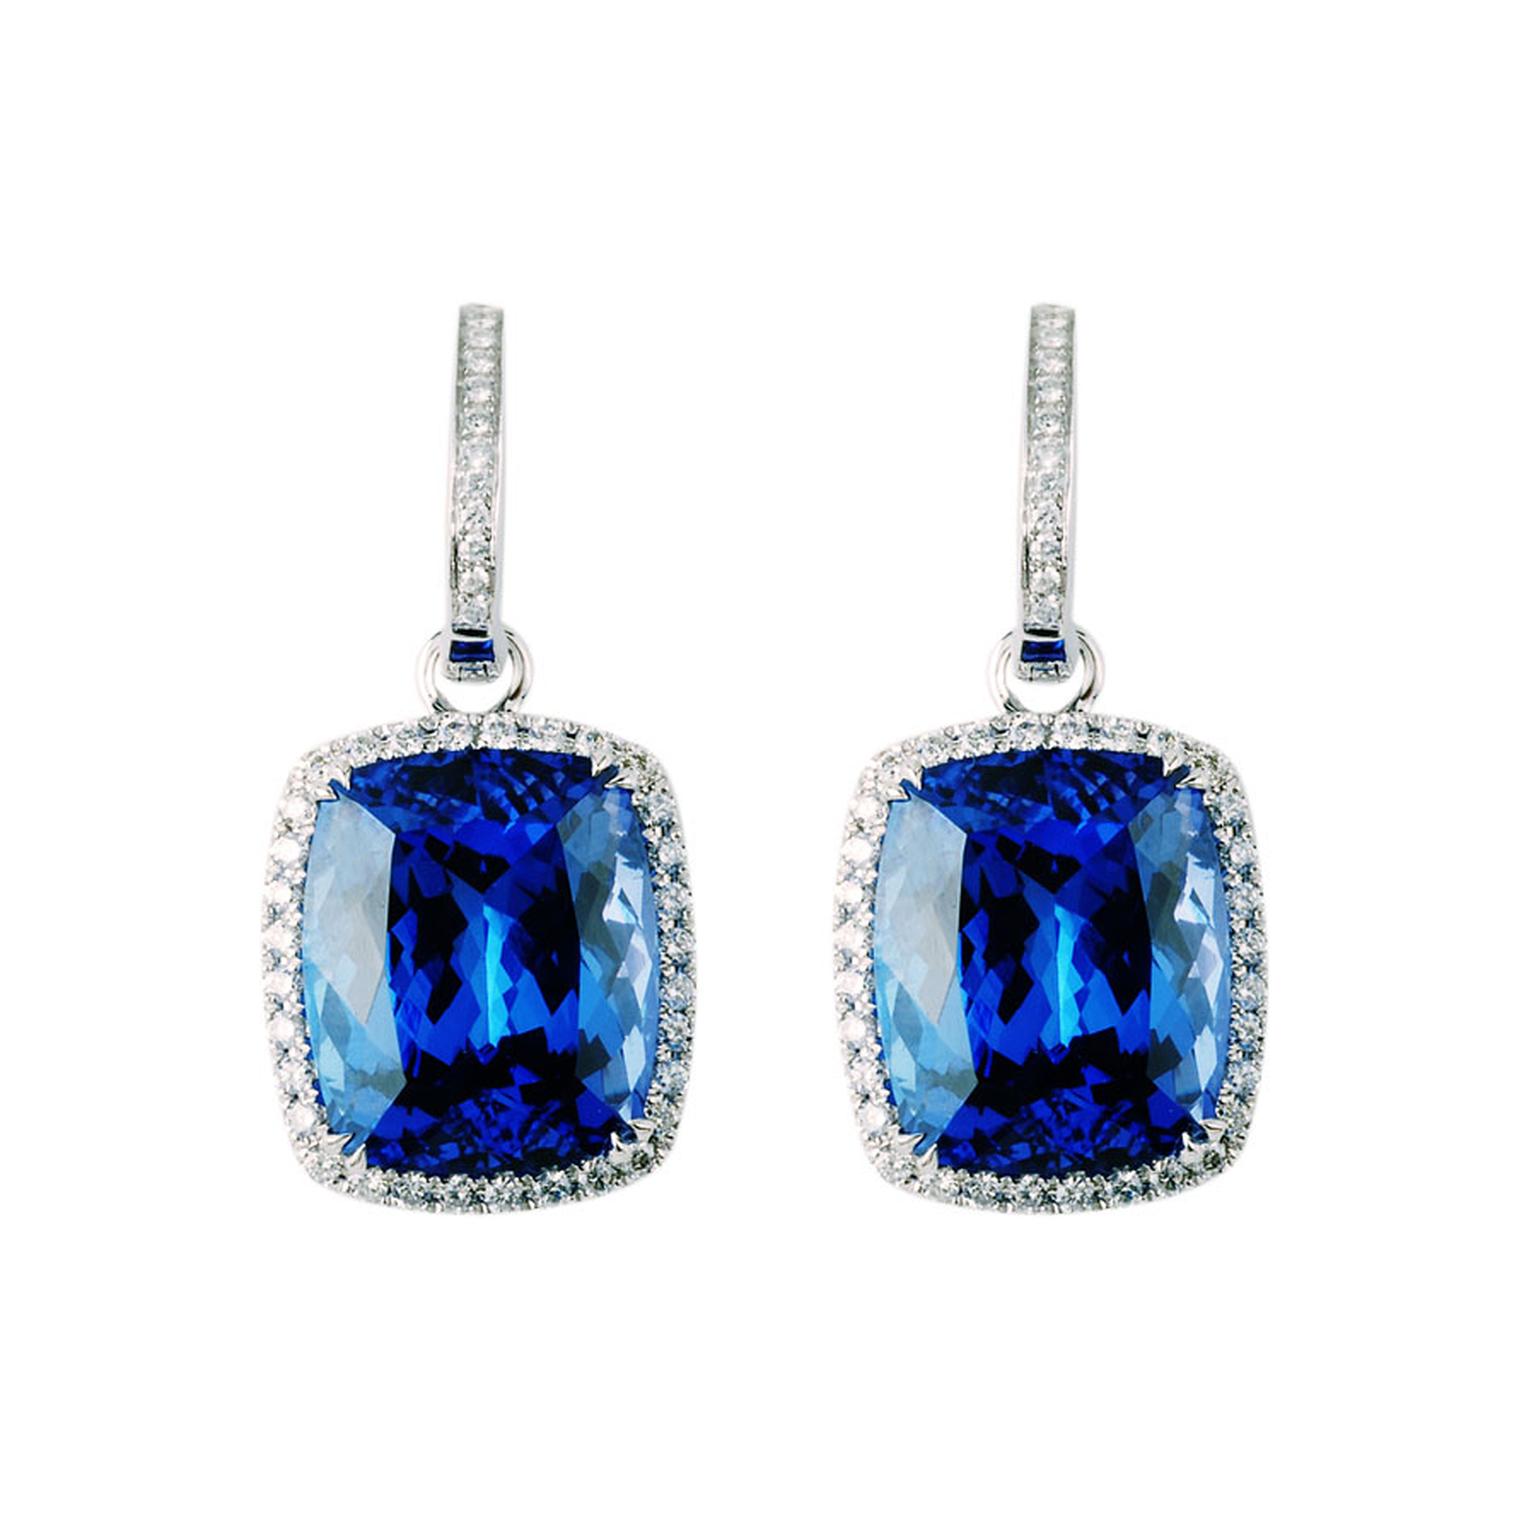 TanzaniteOne Josephine earrings with two cushion cut tanzanite stones surrounded by pavé diamonds.